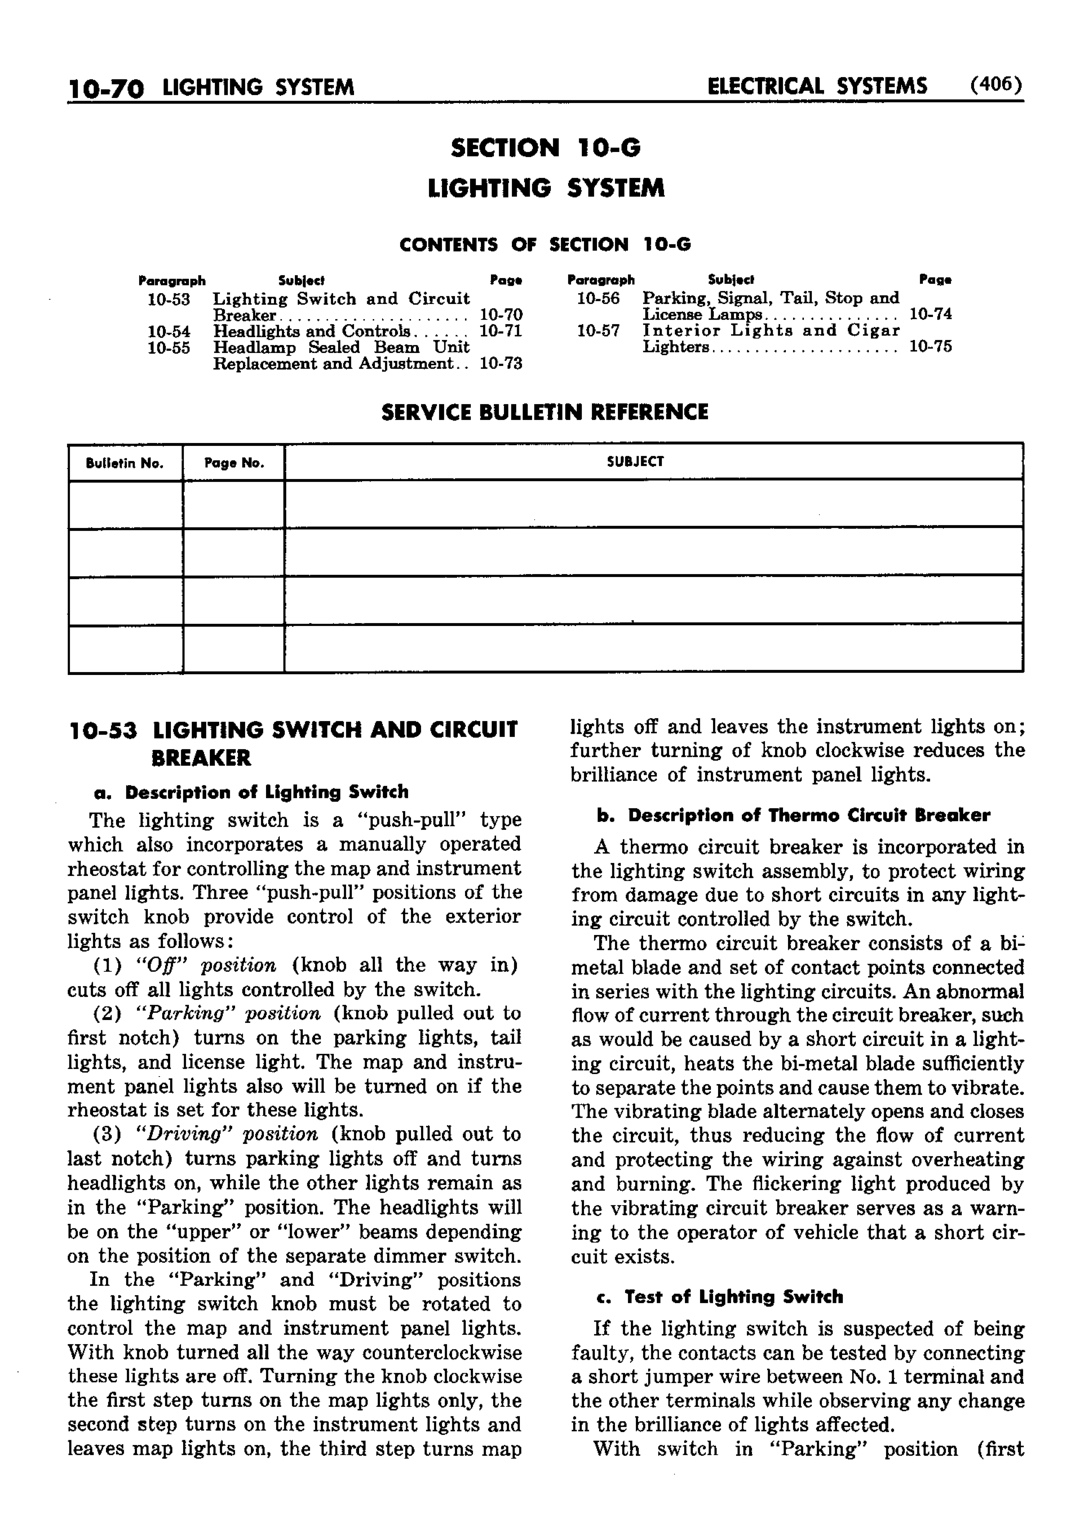 n_11 1952 Buick Shop Manual - Electrical Systems-070-070.jpg